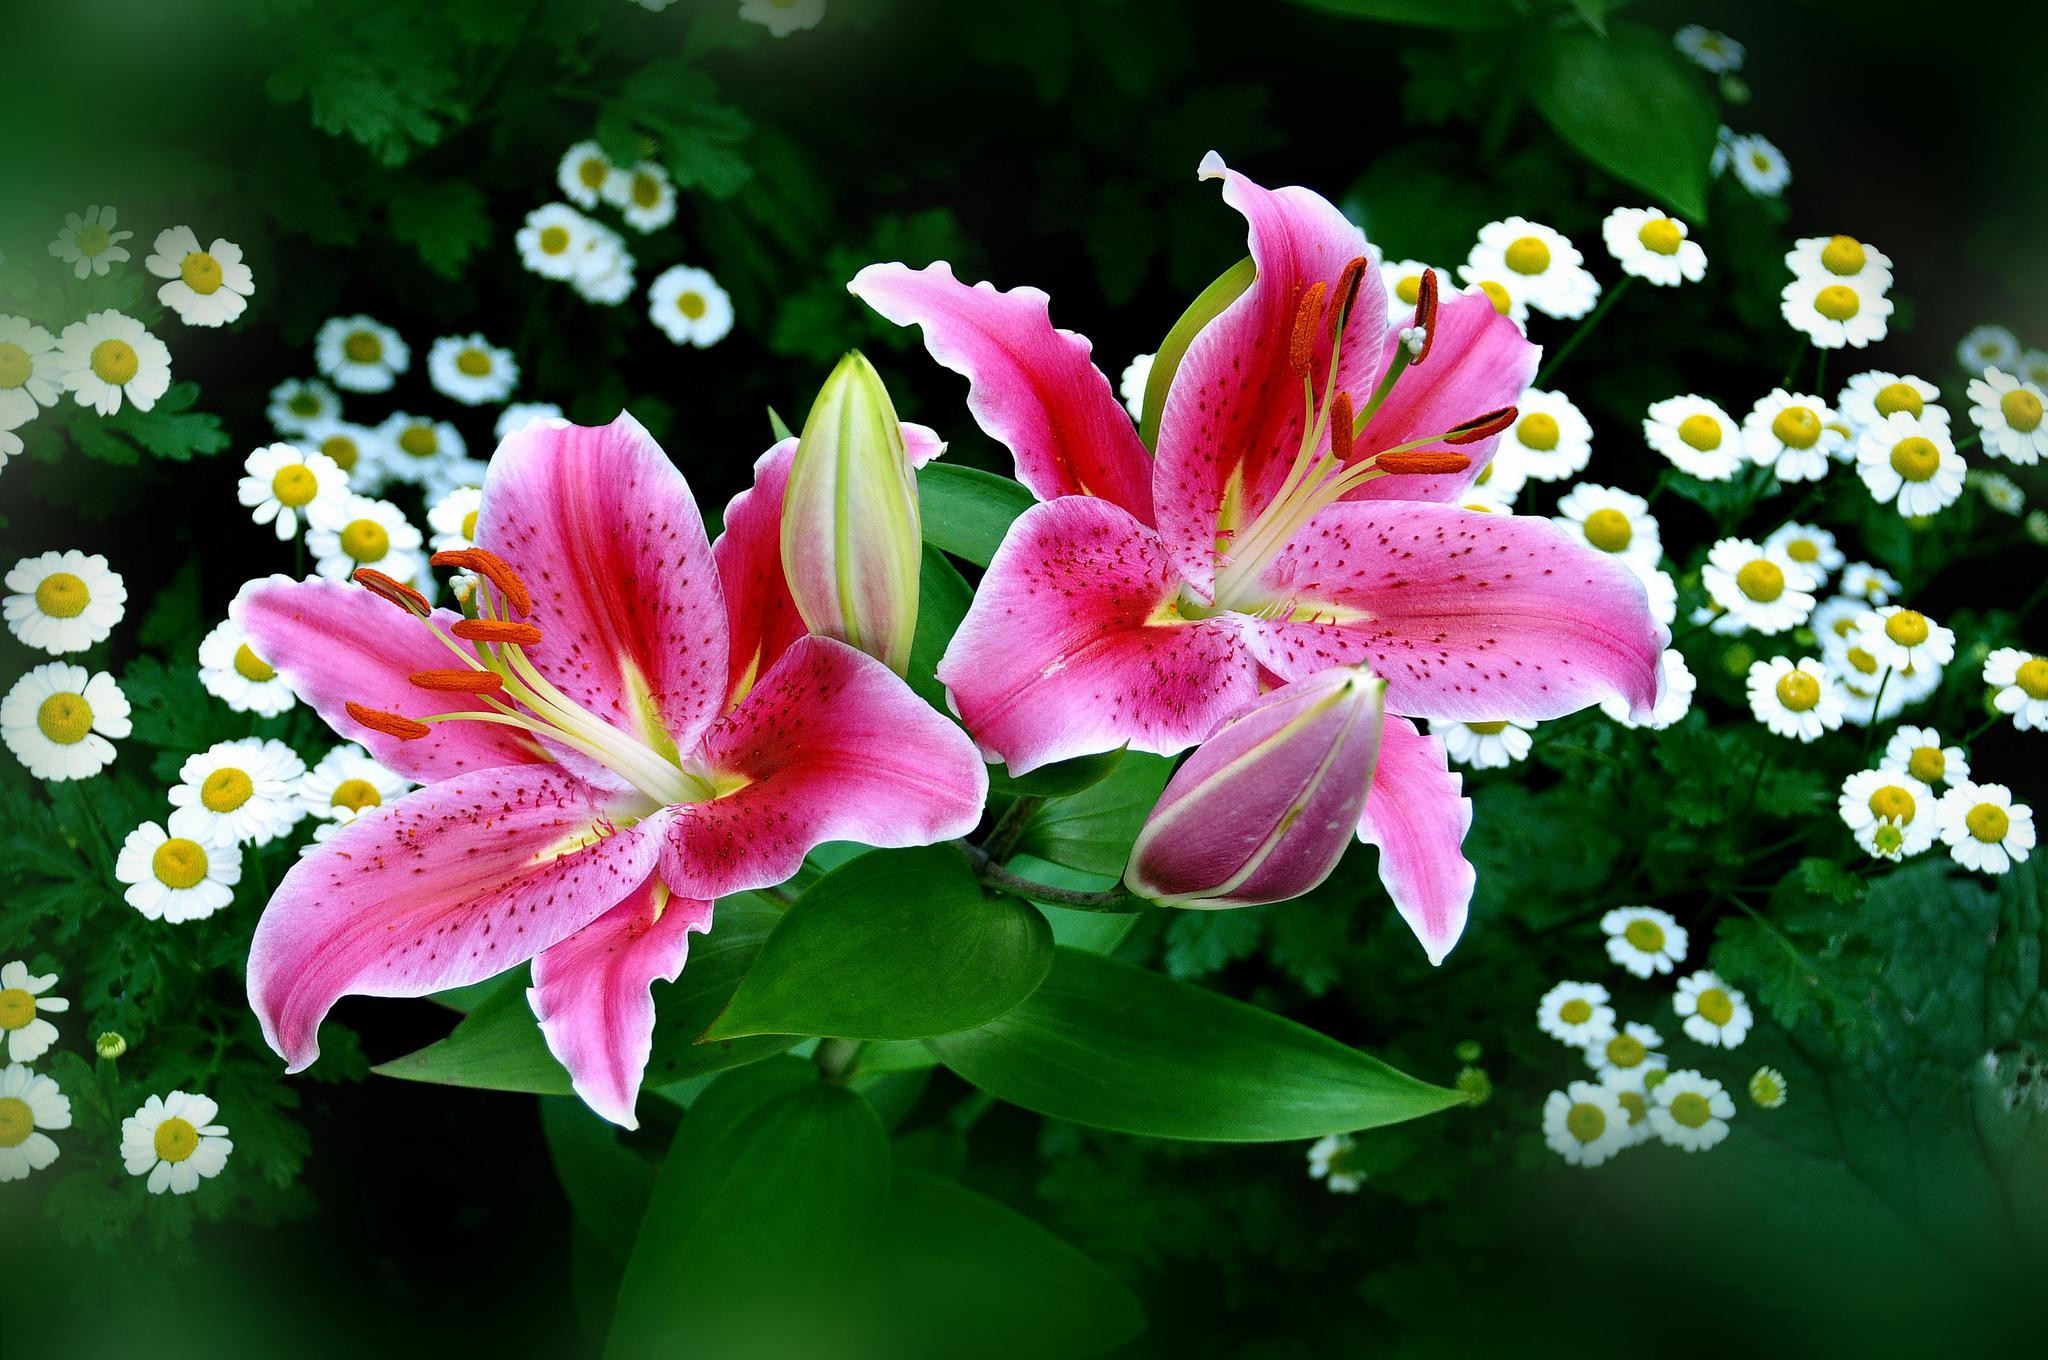 Spring & Pink Easter Lilies wallpaper